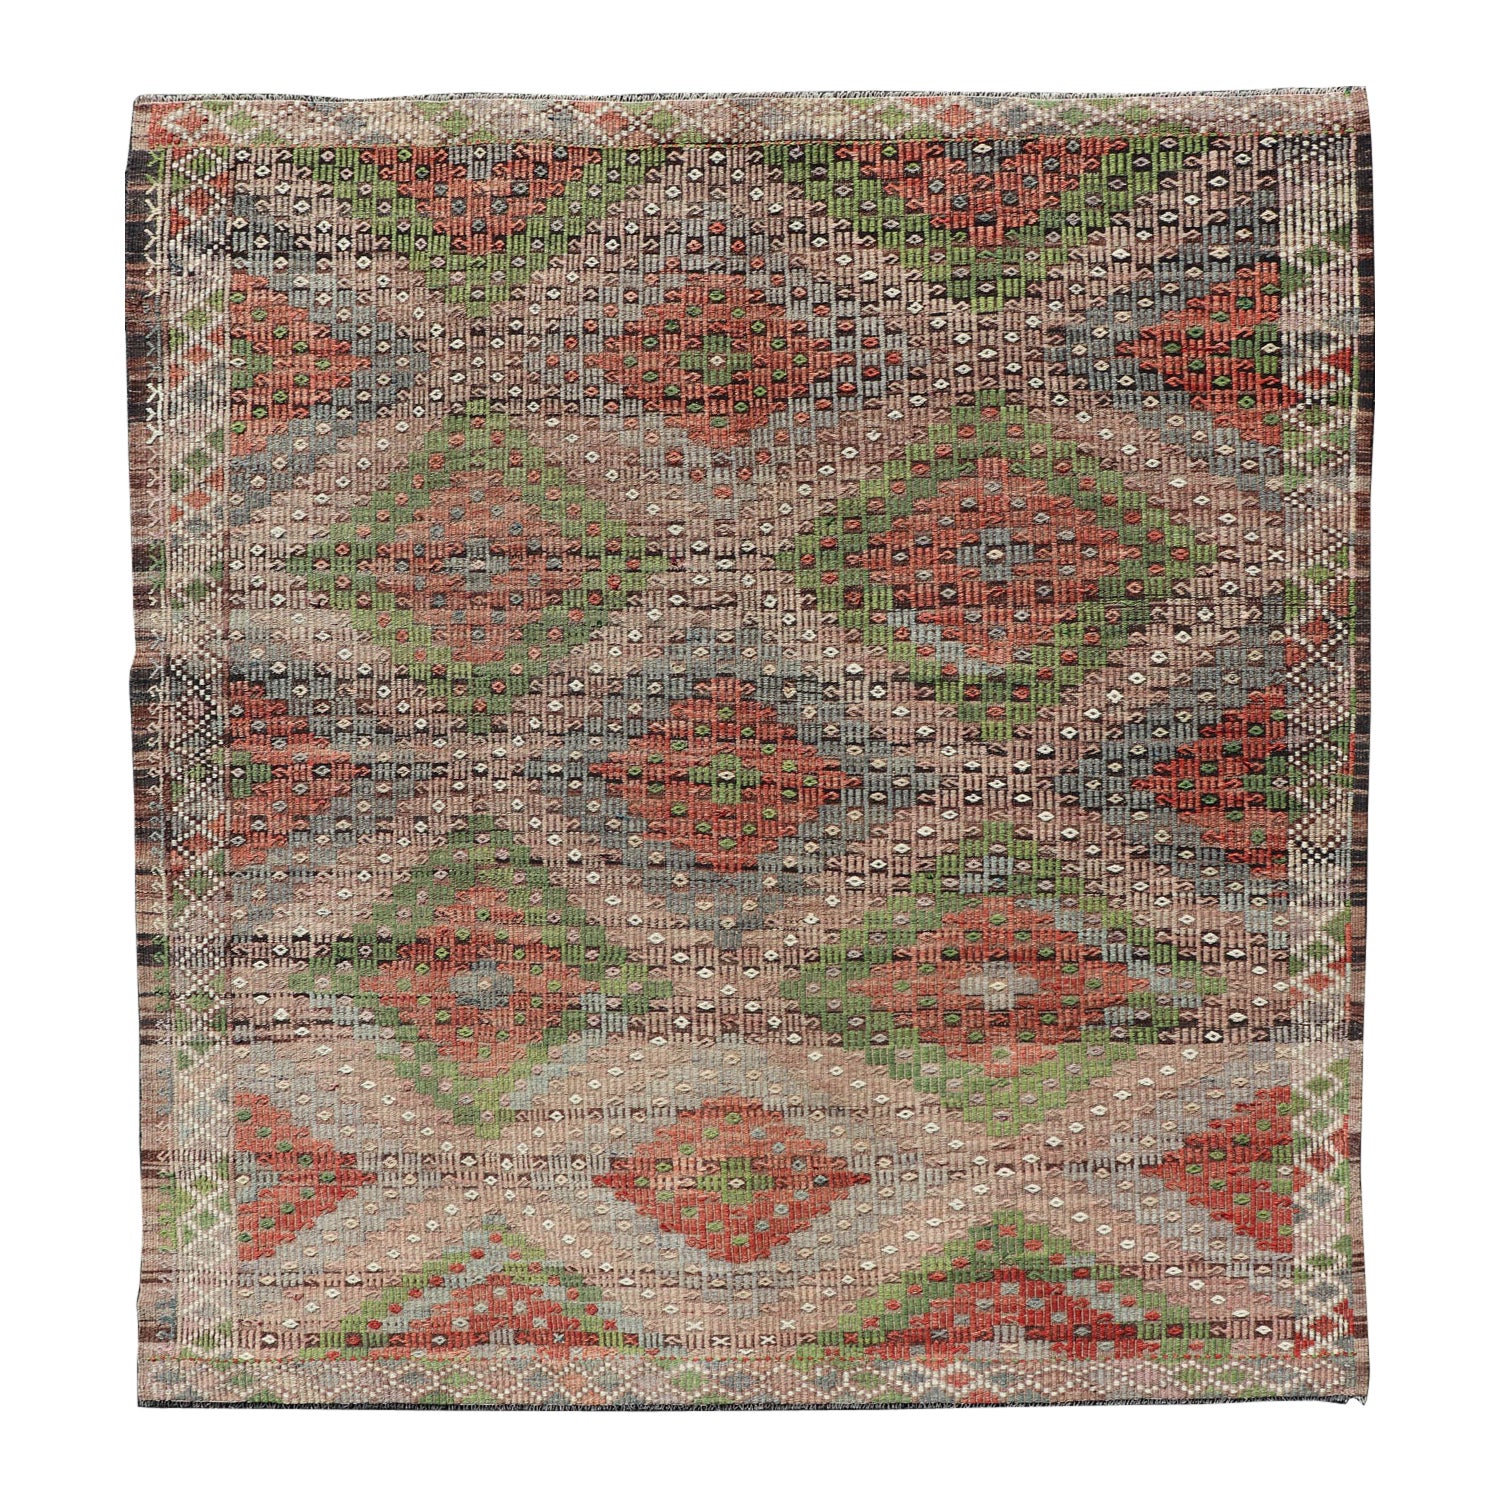 Vintage Turkish Embroidered Flat-Weave Rug with Geometric Design with Green